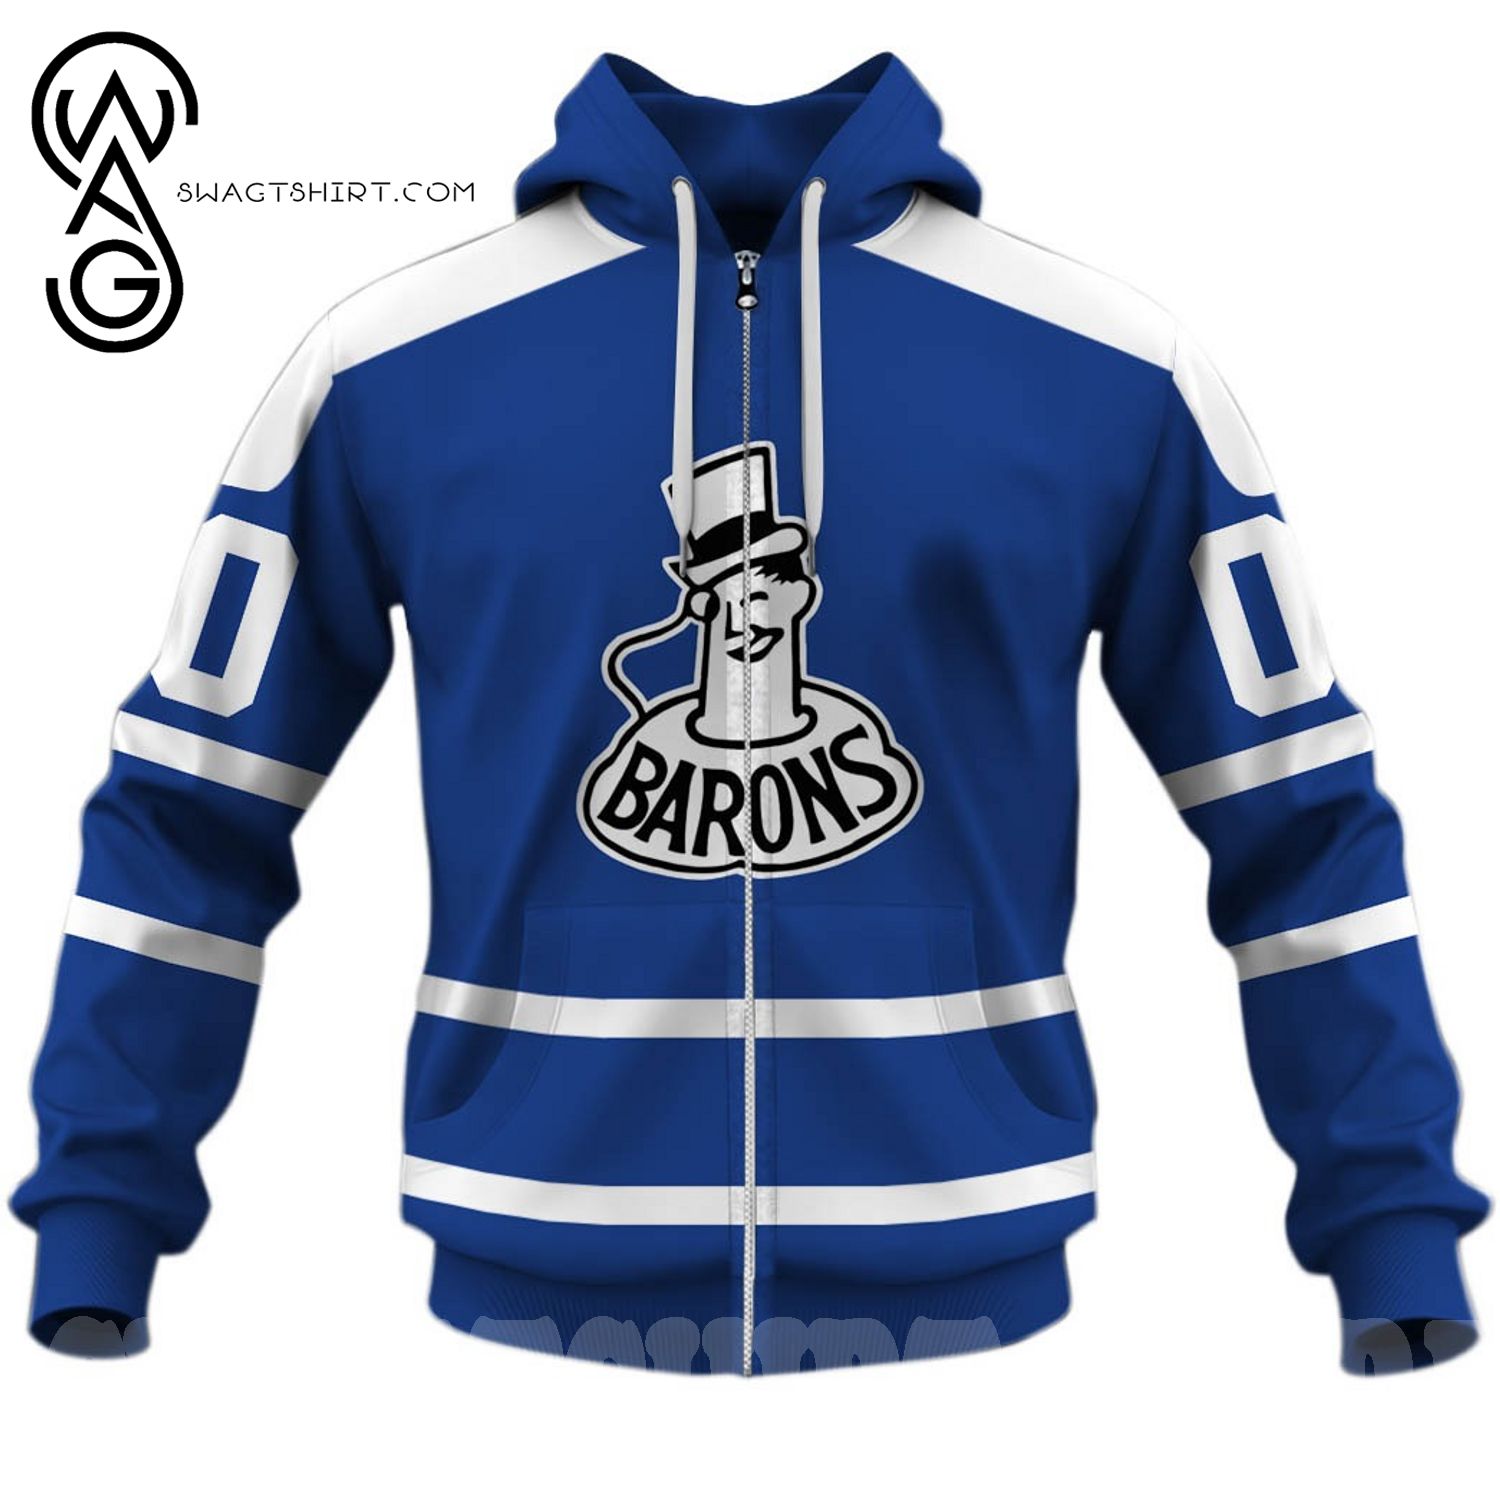 Best Selling Product] Customize Vintage AHL Cleveland Barons 1963 Retro  Hockey Jersey For Sport Fans All Over Printed Shirt